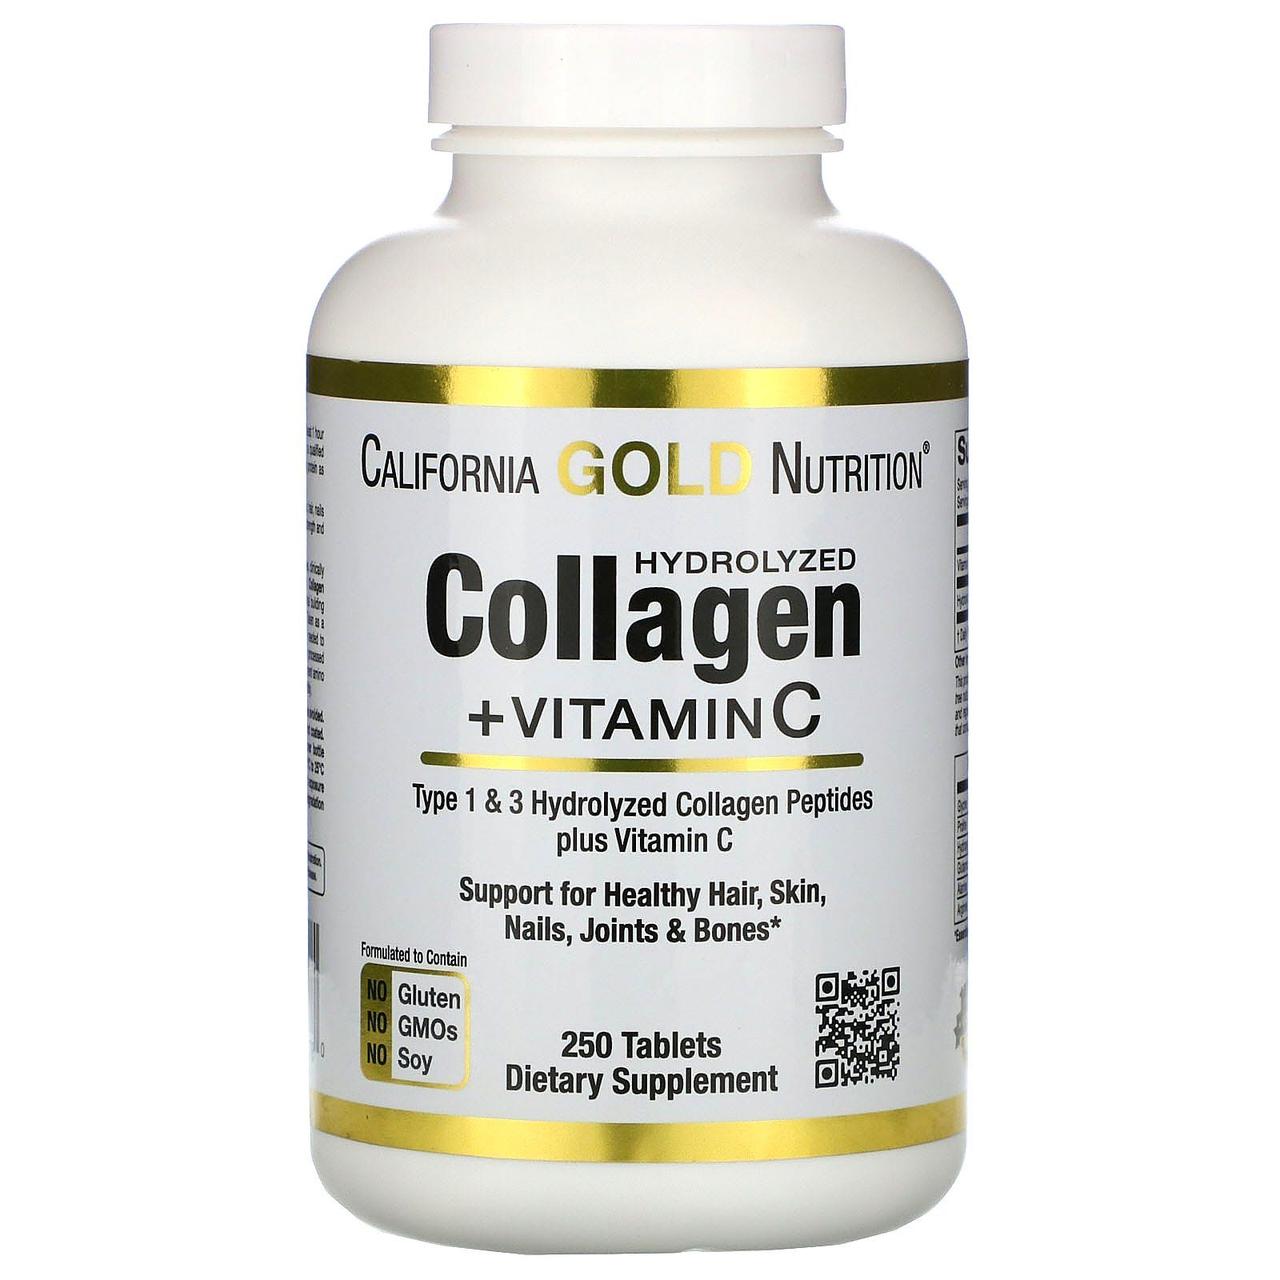 California Gold Nutrition California Gold Nutrition Hydrolyzed Collagen Peptides + Vitamin C, Type 1 & 3, 250 Tabs, , 250 г